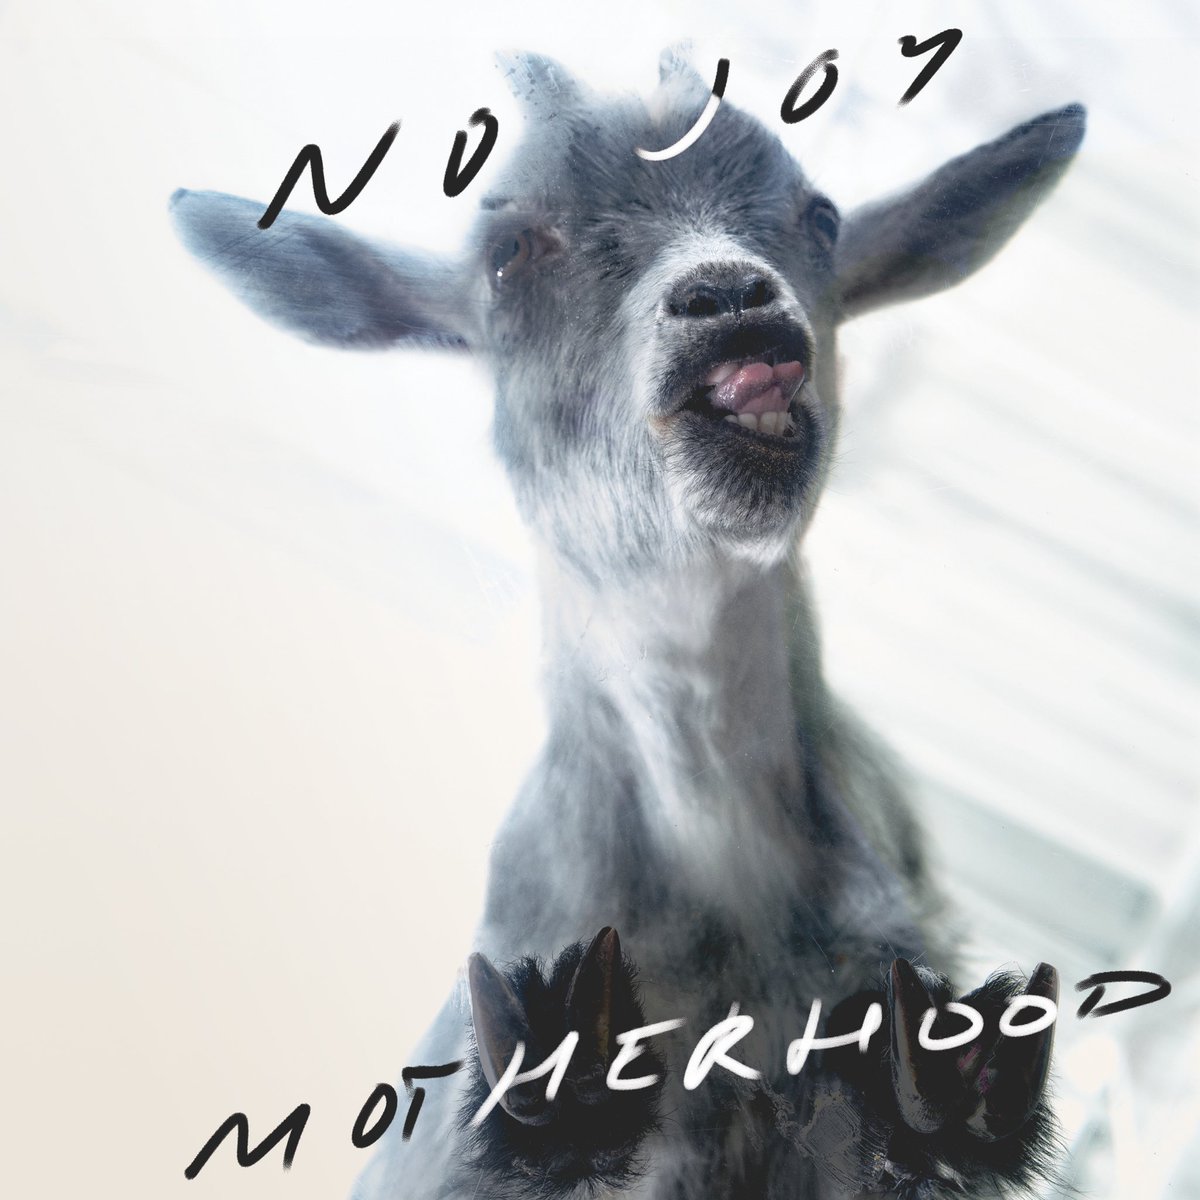 51. No Joy - Motherhood (they just go full on 90s dream pop worship here, it rules)